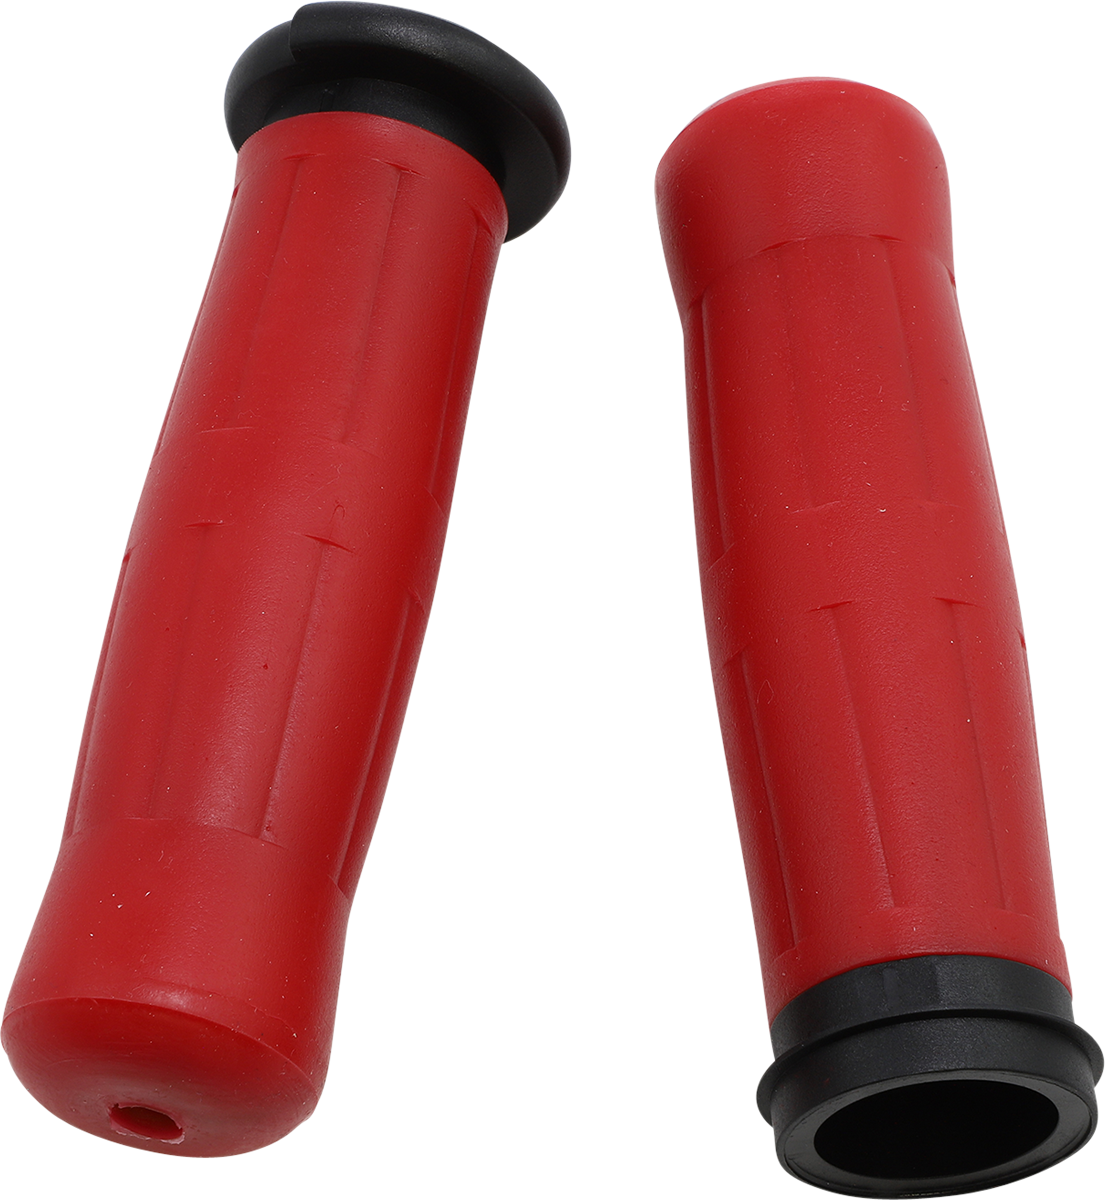 Avon Old School Red TBW 1" Motorcycle Handlebar Grips 2008-2023 Harley Touring